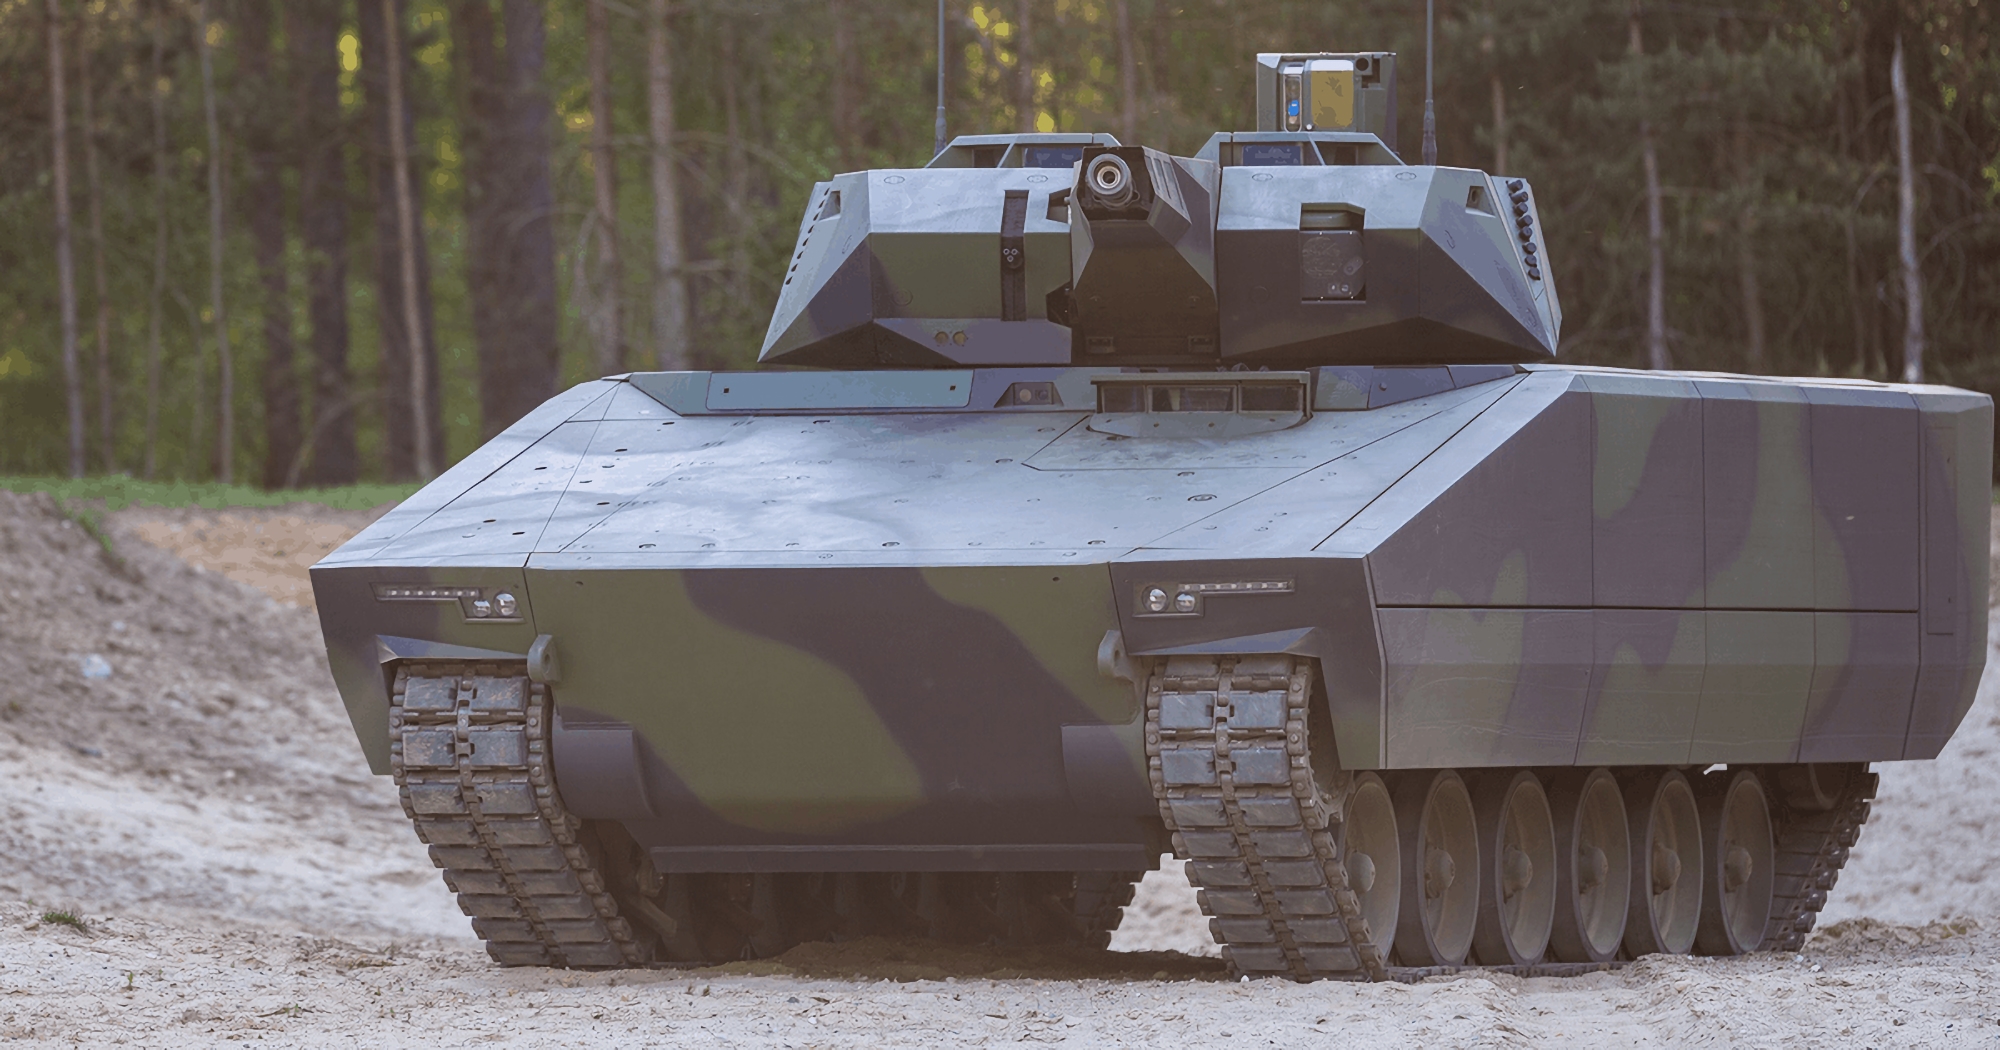 Not just Panther KF51 tanks: AFU may receive modern Lynx KF41 infantry fighting vehicles